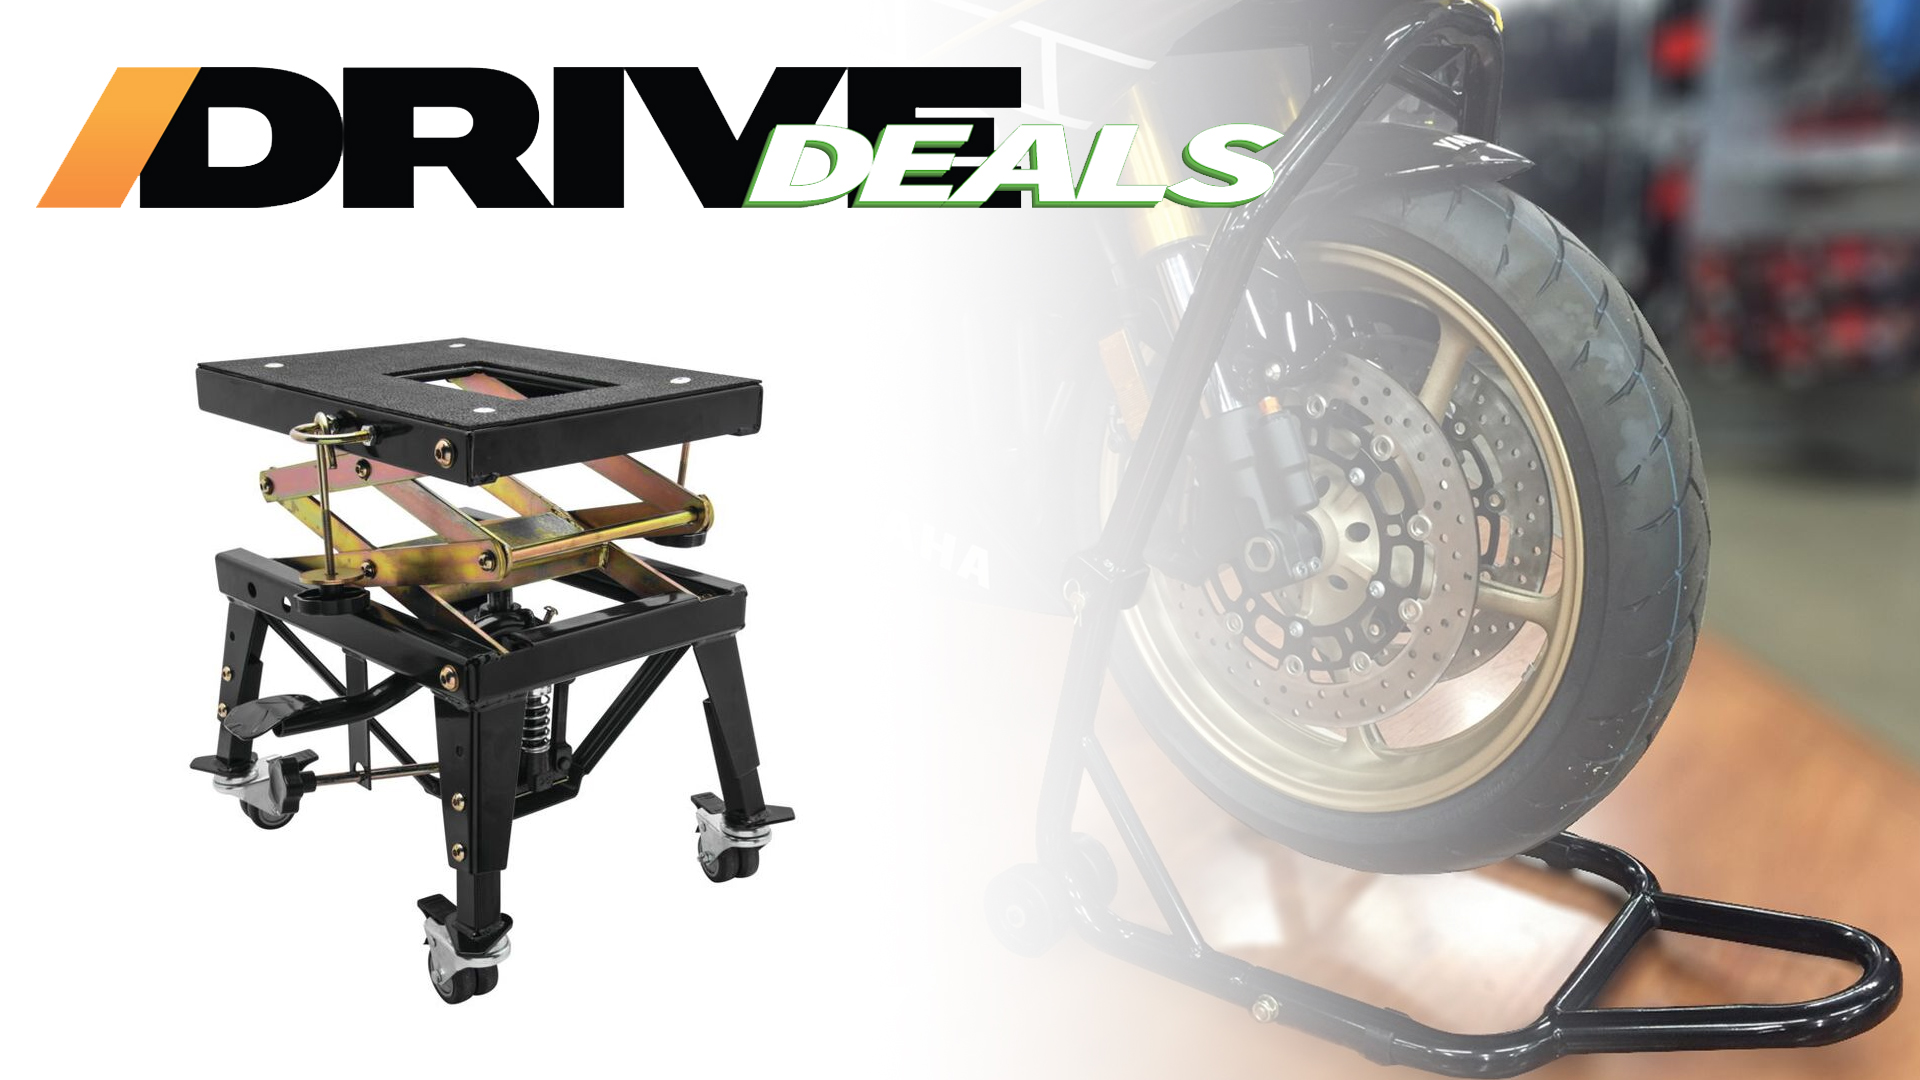 Get Your Motorcycle Ready for Riding Season With Deals on Lifts and Stands